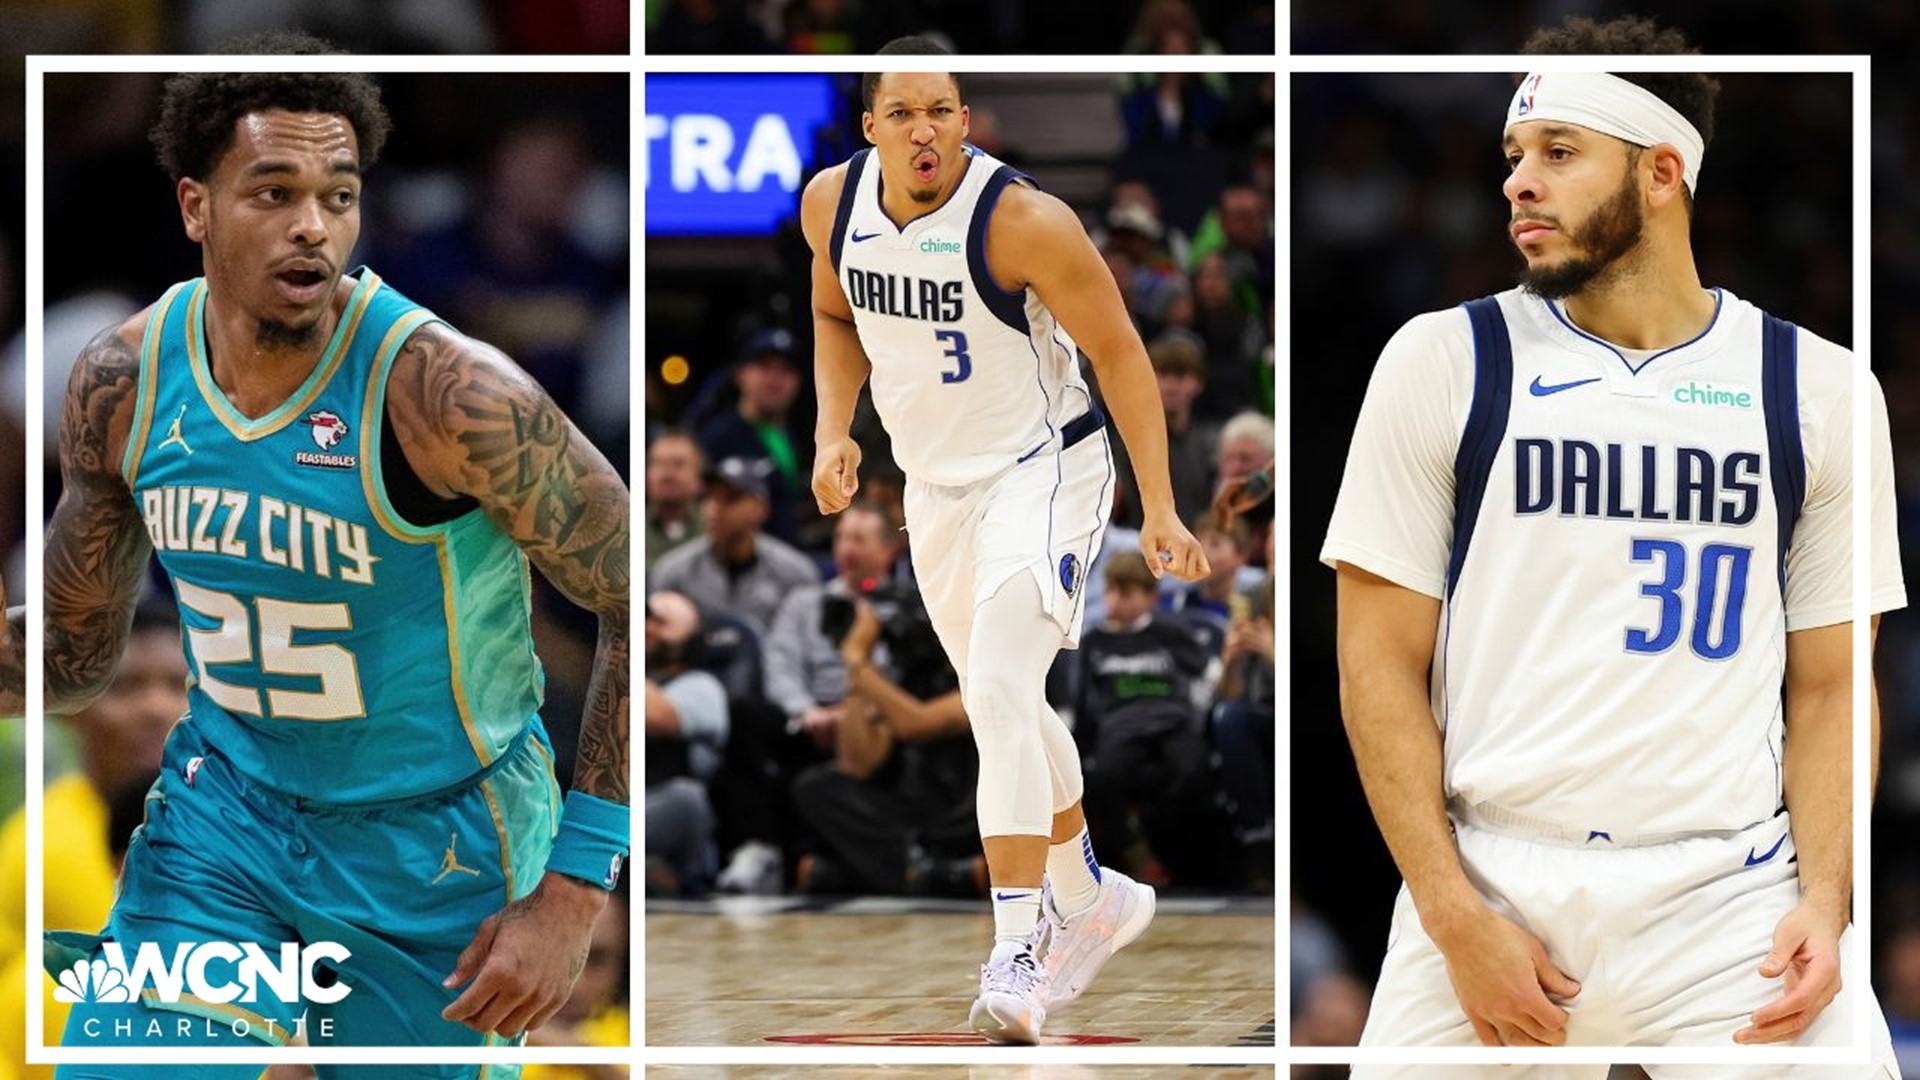 NBA Trade Deadline: Trades To Improve Teams Who Could Use Help